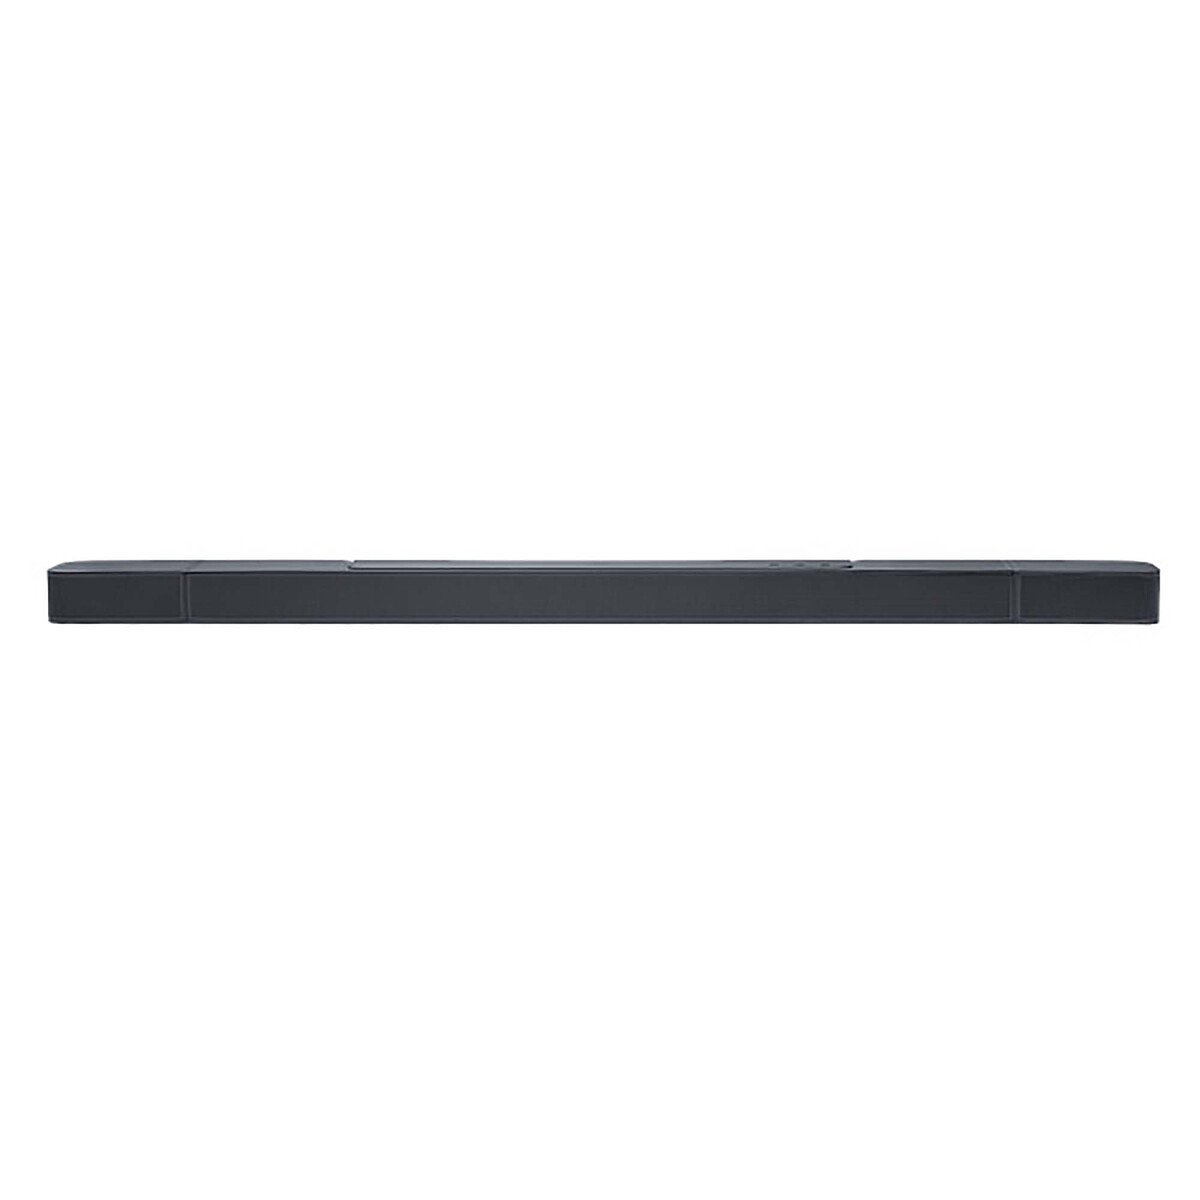 JBL BAR1000 7.1.4-channel soundbar with detachable surround speakers, MultiBeam™, Dolby Atmos®, and DTS:X